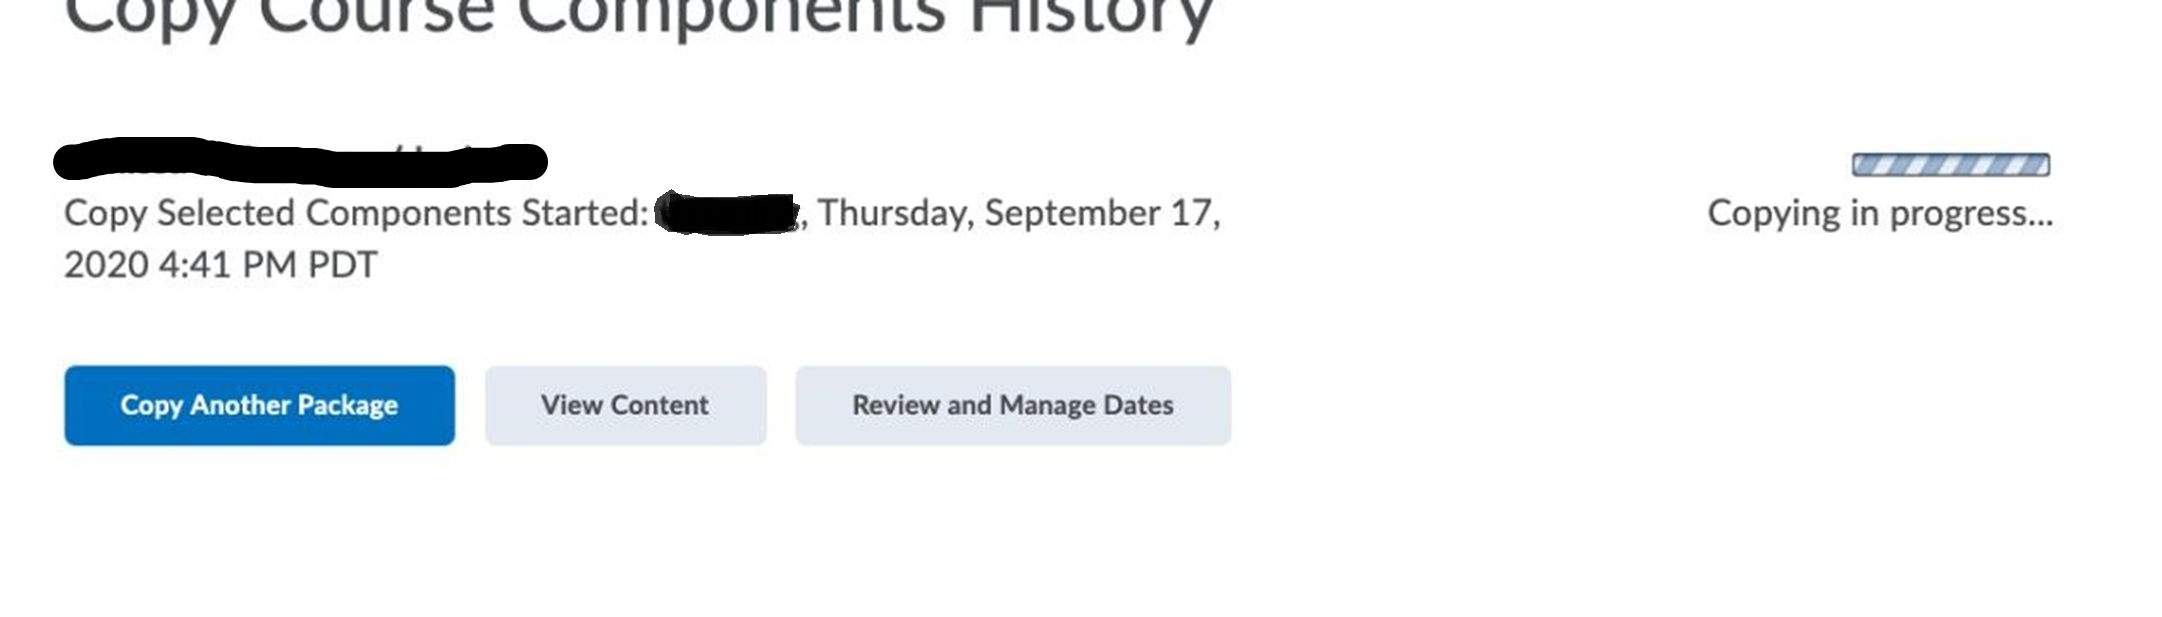 A history of copying course components is available, listing who initiated the copying on what day and time. Options to copy another package, view content, and review and manage dates are available.